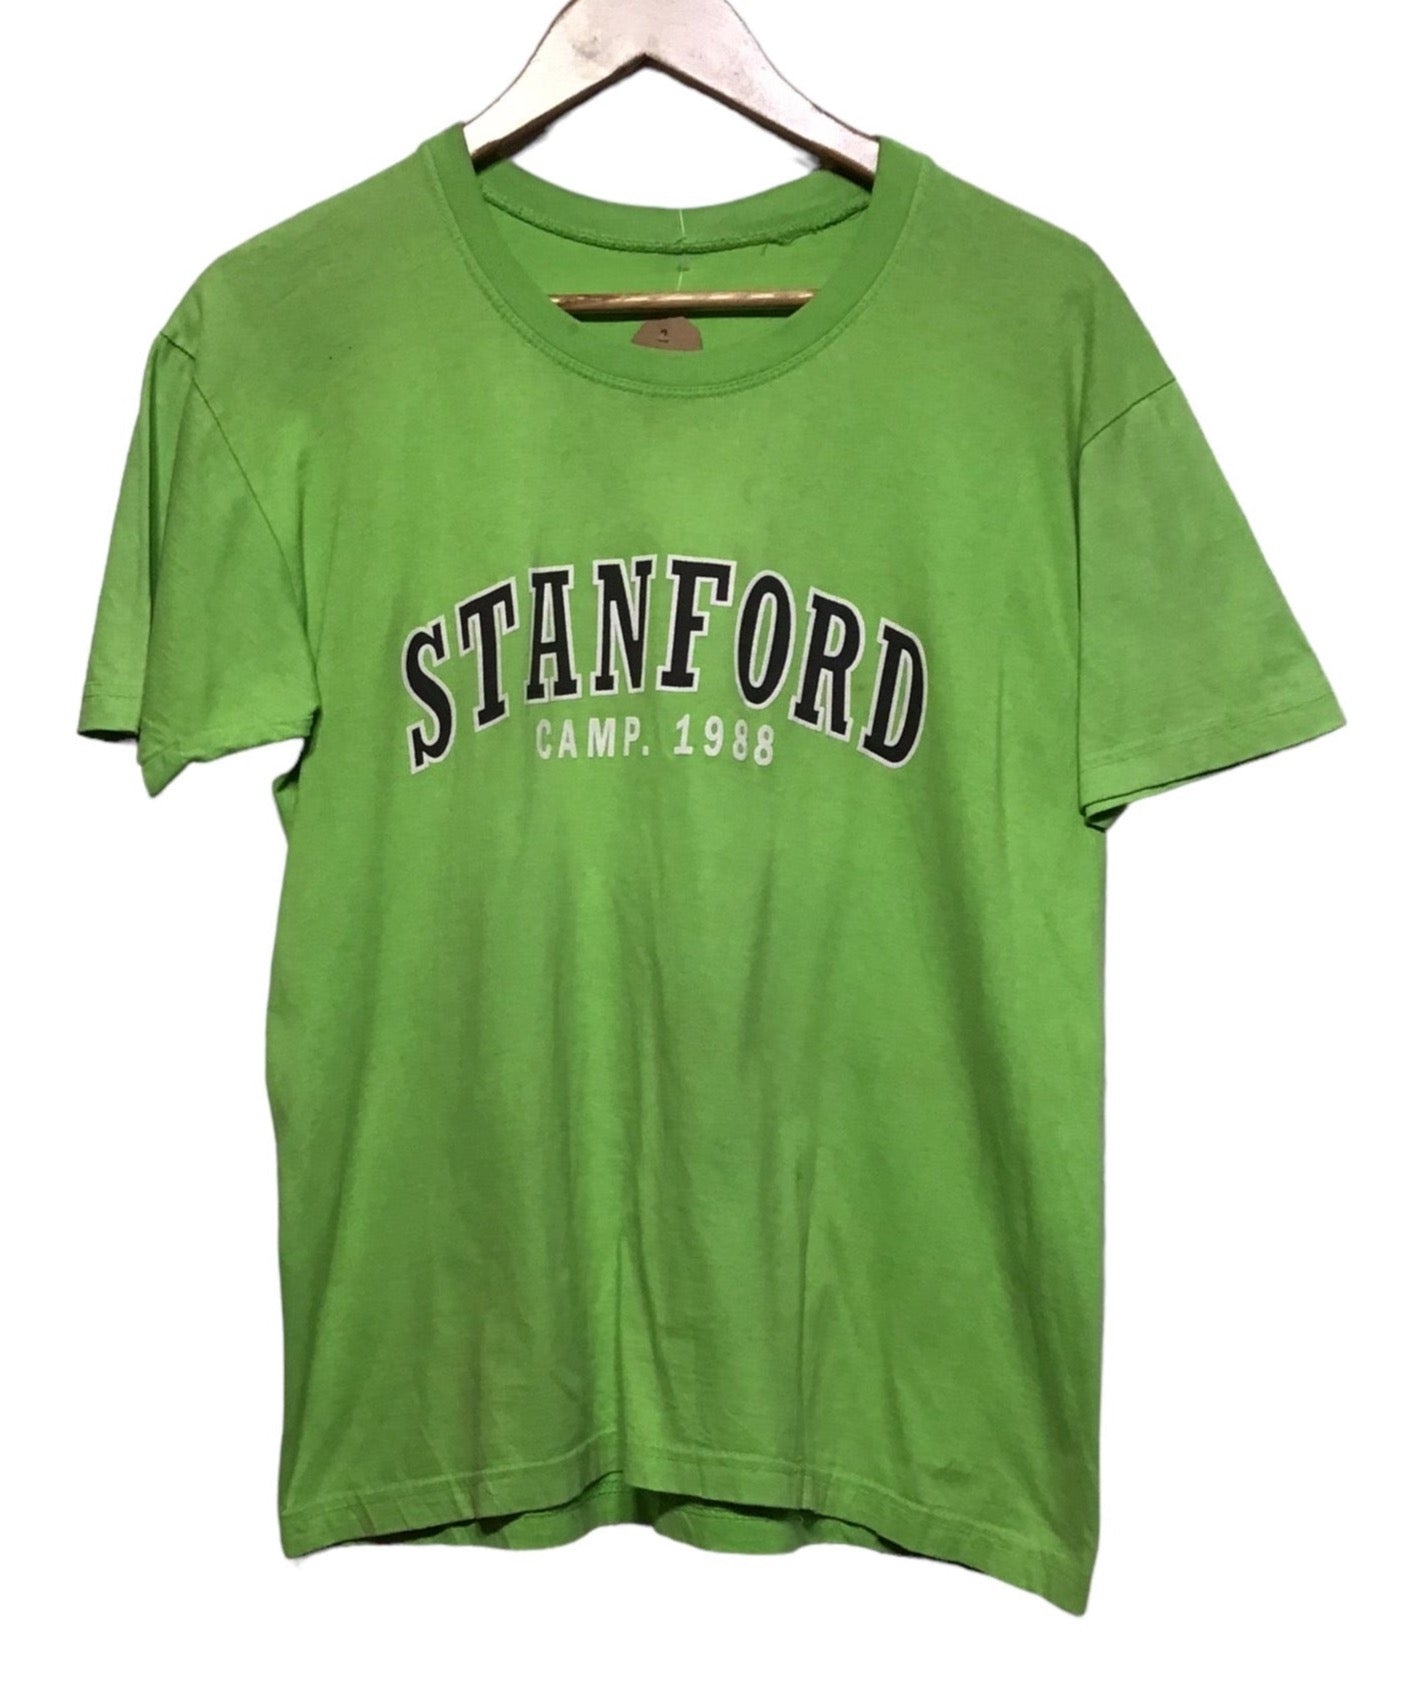 Stanford Camp 1988 Tee (Size M)